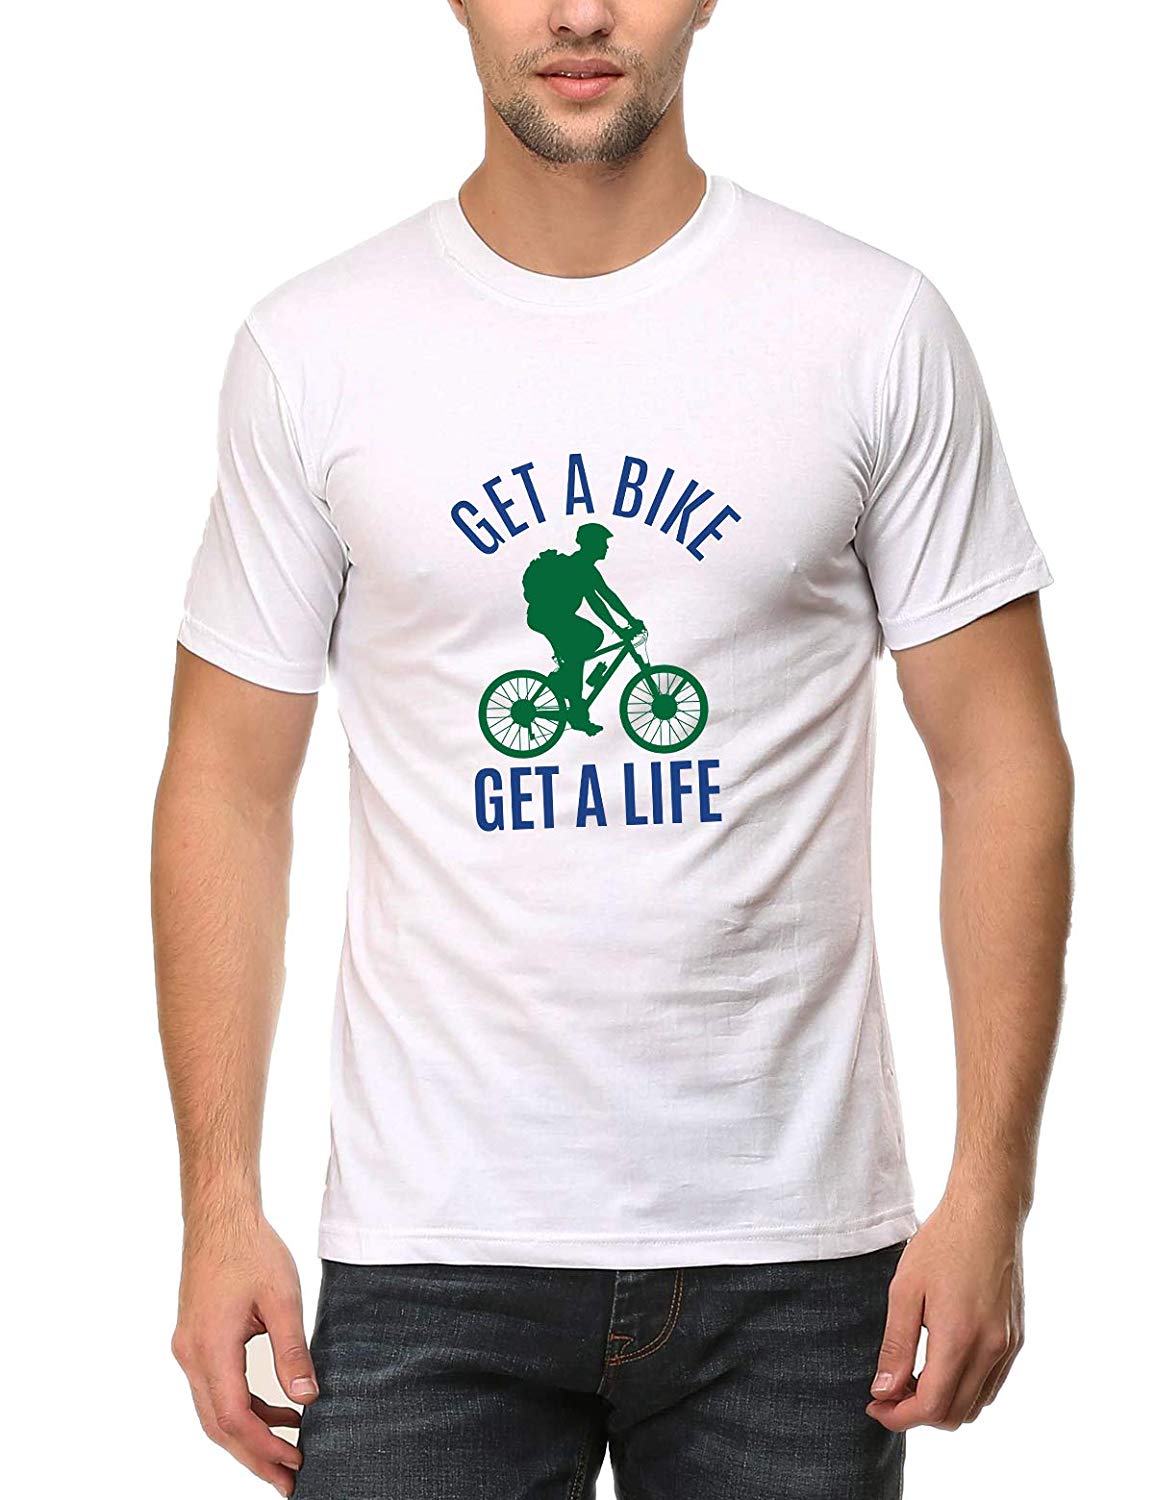 Swag Swami Men's Get A Bike Get A Life T-Shirt - Cyclop.in